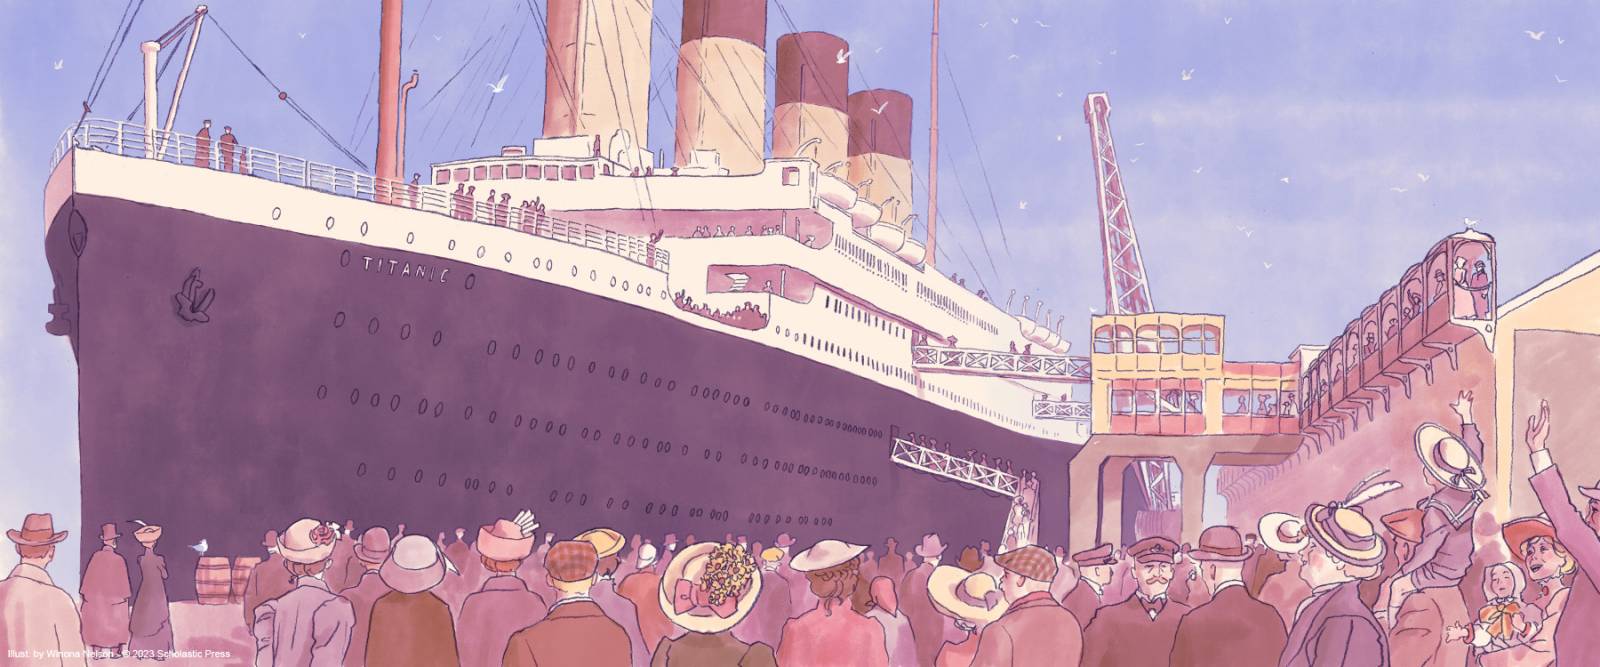 Illustrations: If You Sailed on the Titanic